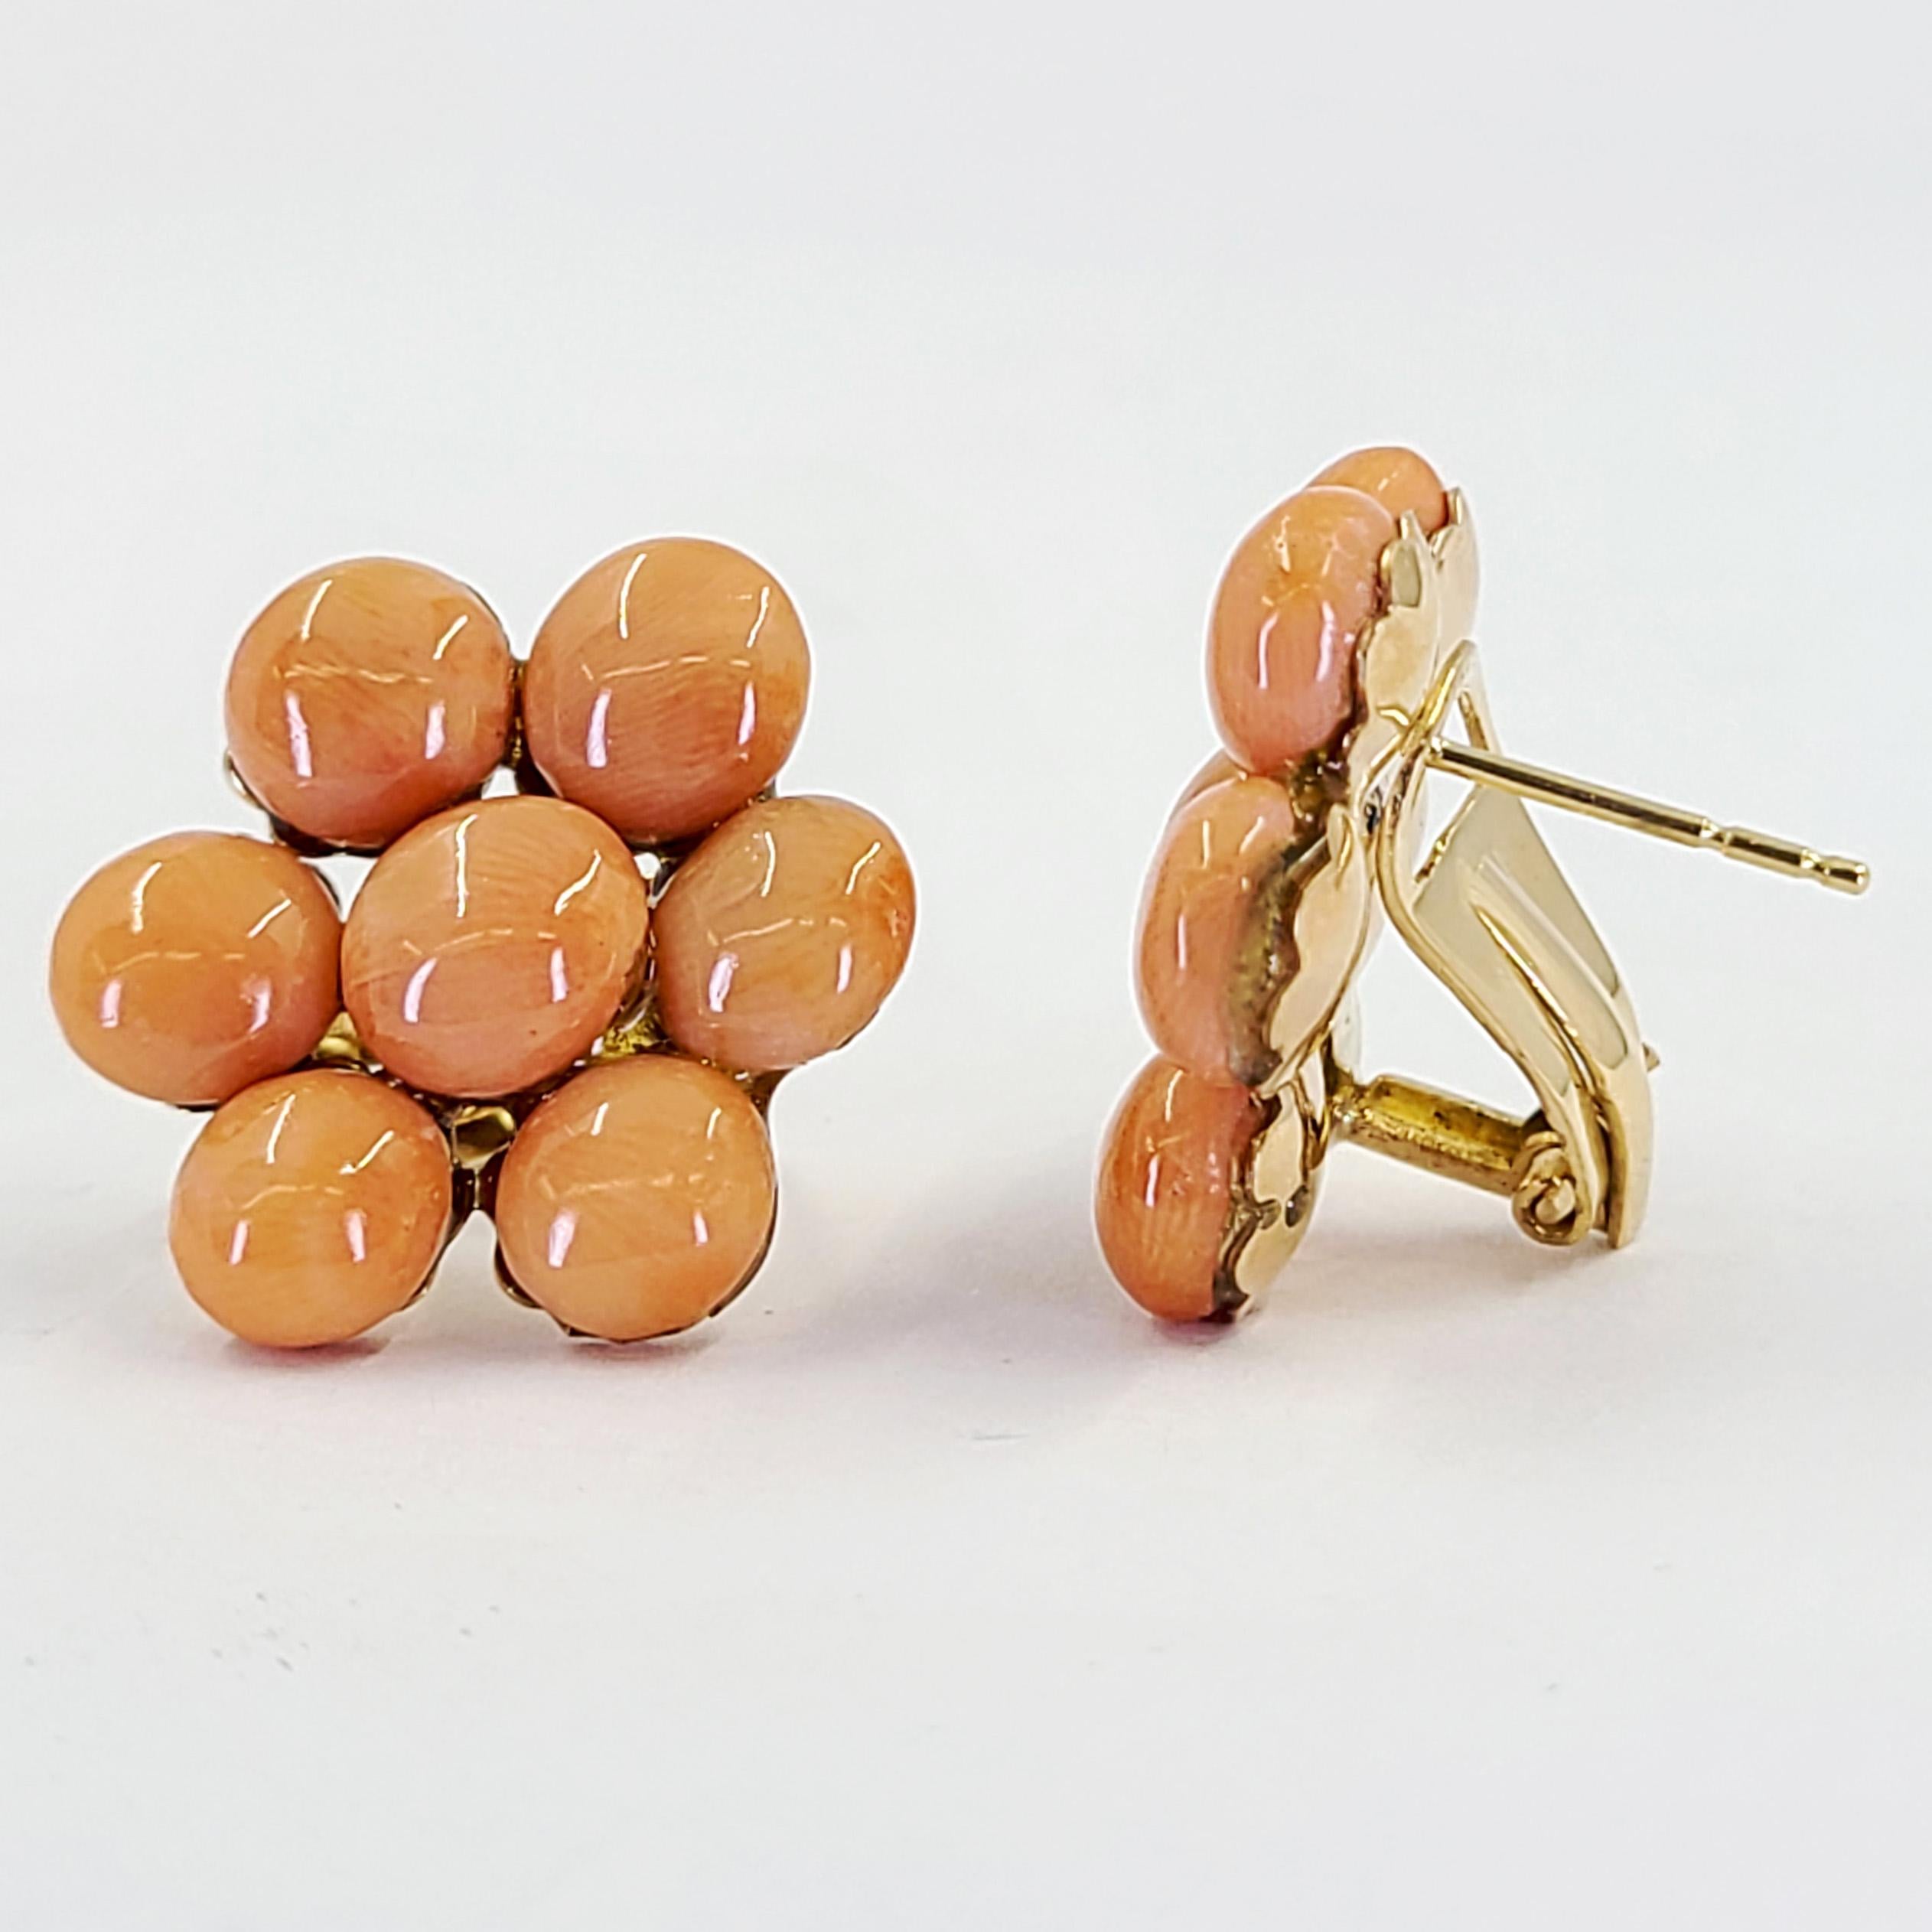 18 Karat Yellow Gold Earrings Featuring 14 7mm Round Cabochon Cut Corals. Pierced Post With Omega Clip Back. Finished Weight Is 9.1 Grams.